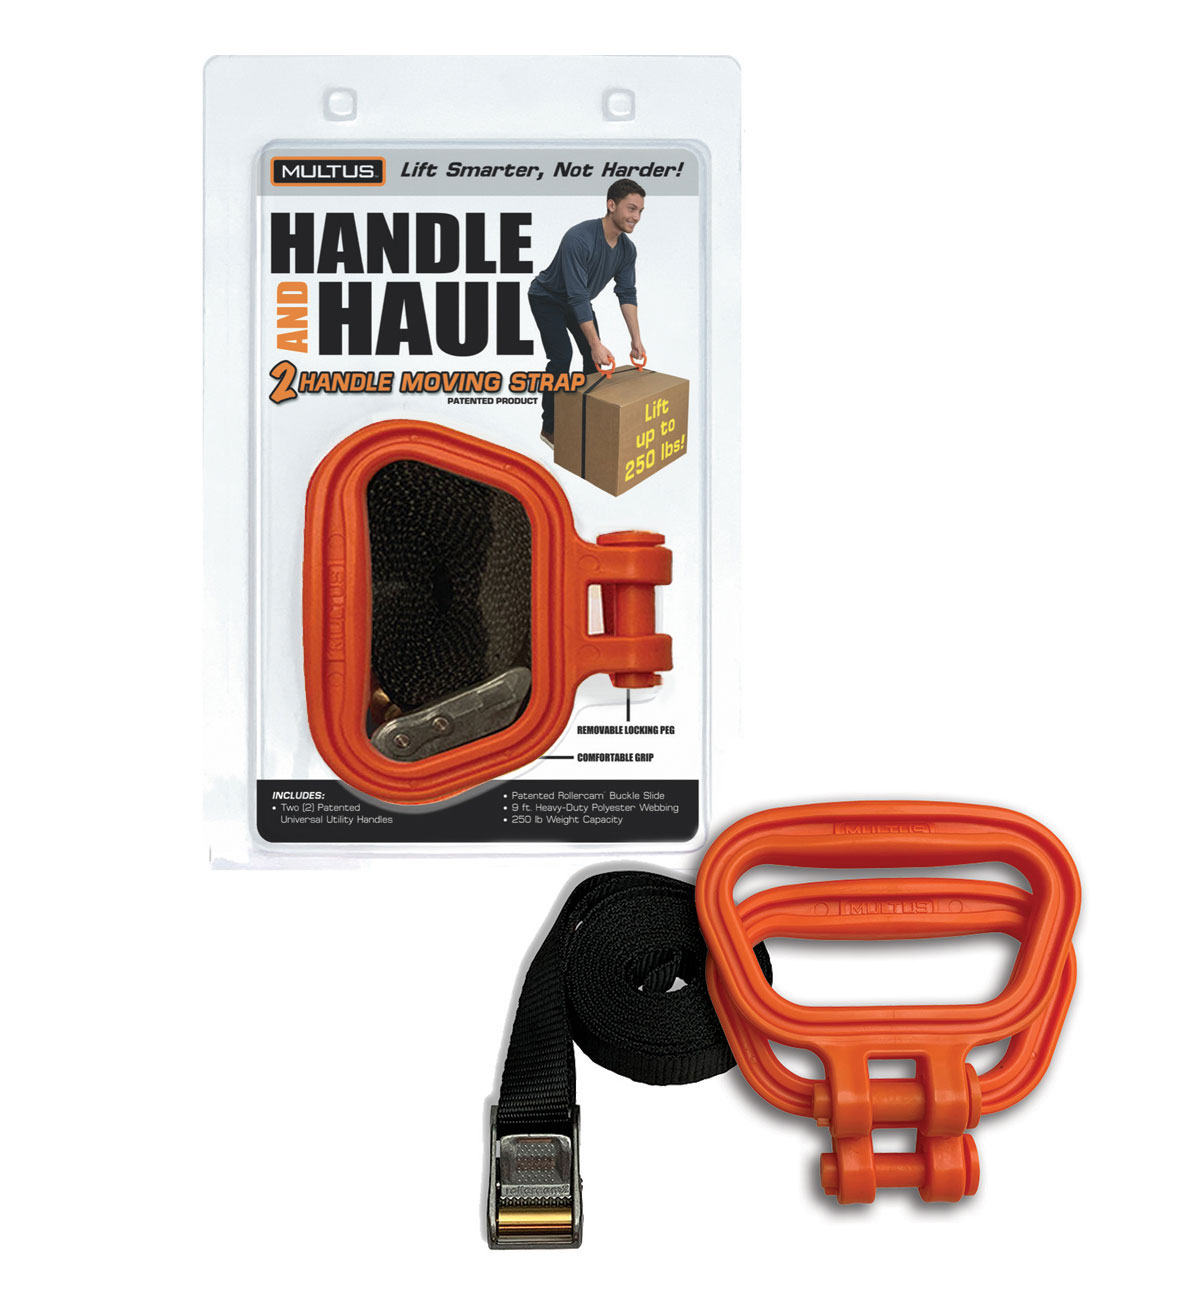 MULTUS Handle and Haul Adjustable Strap Cam Buckle System to Secure Lift Carry Move Awkward Heavy Boxes Furniture Building Construction Materials Equipment Fast & Easy; Tie Down 